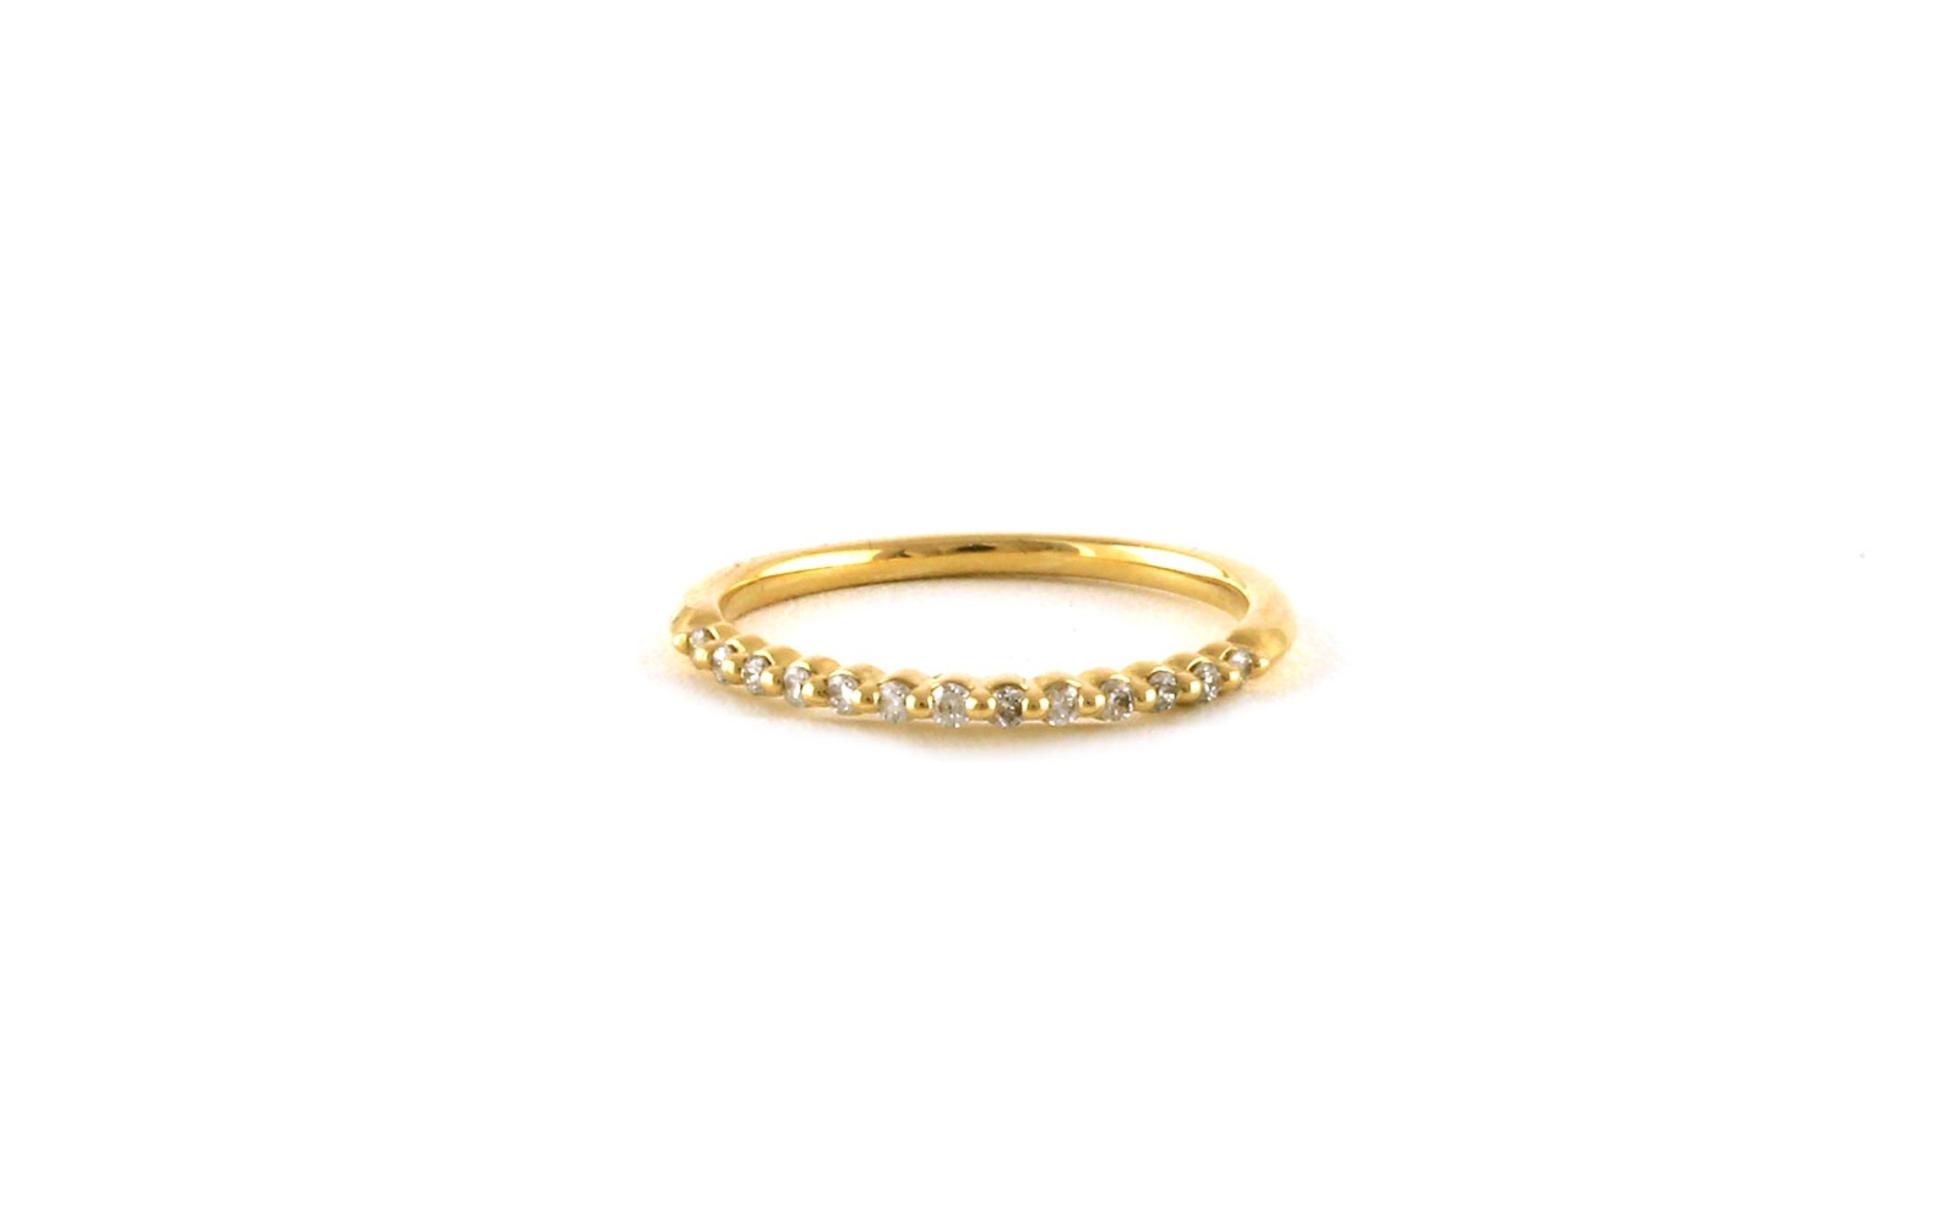 13-Stone Share Prong Diamond Band in Yellow Gold (0.15cts TWT)